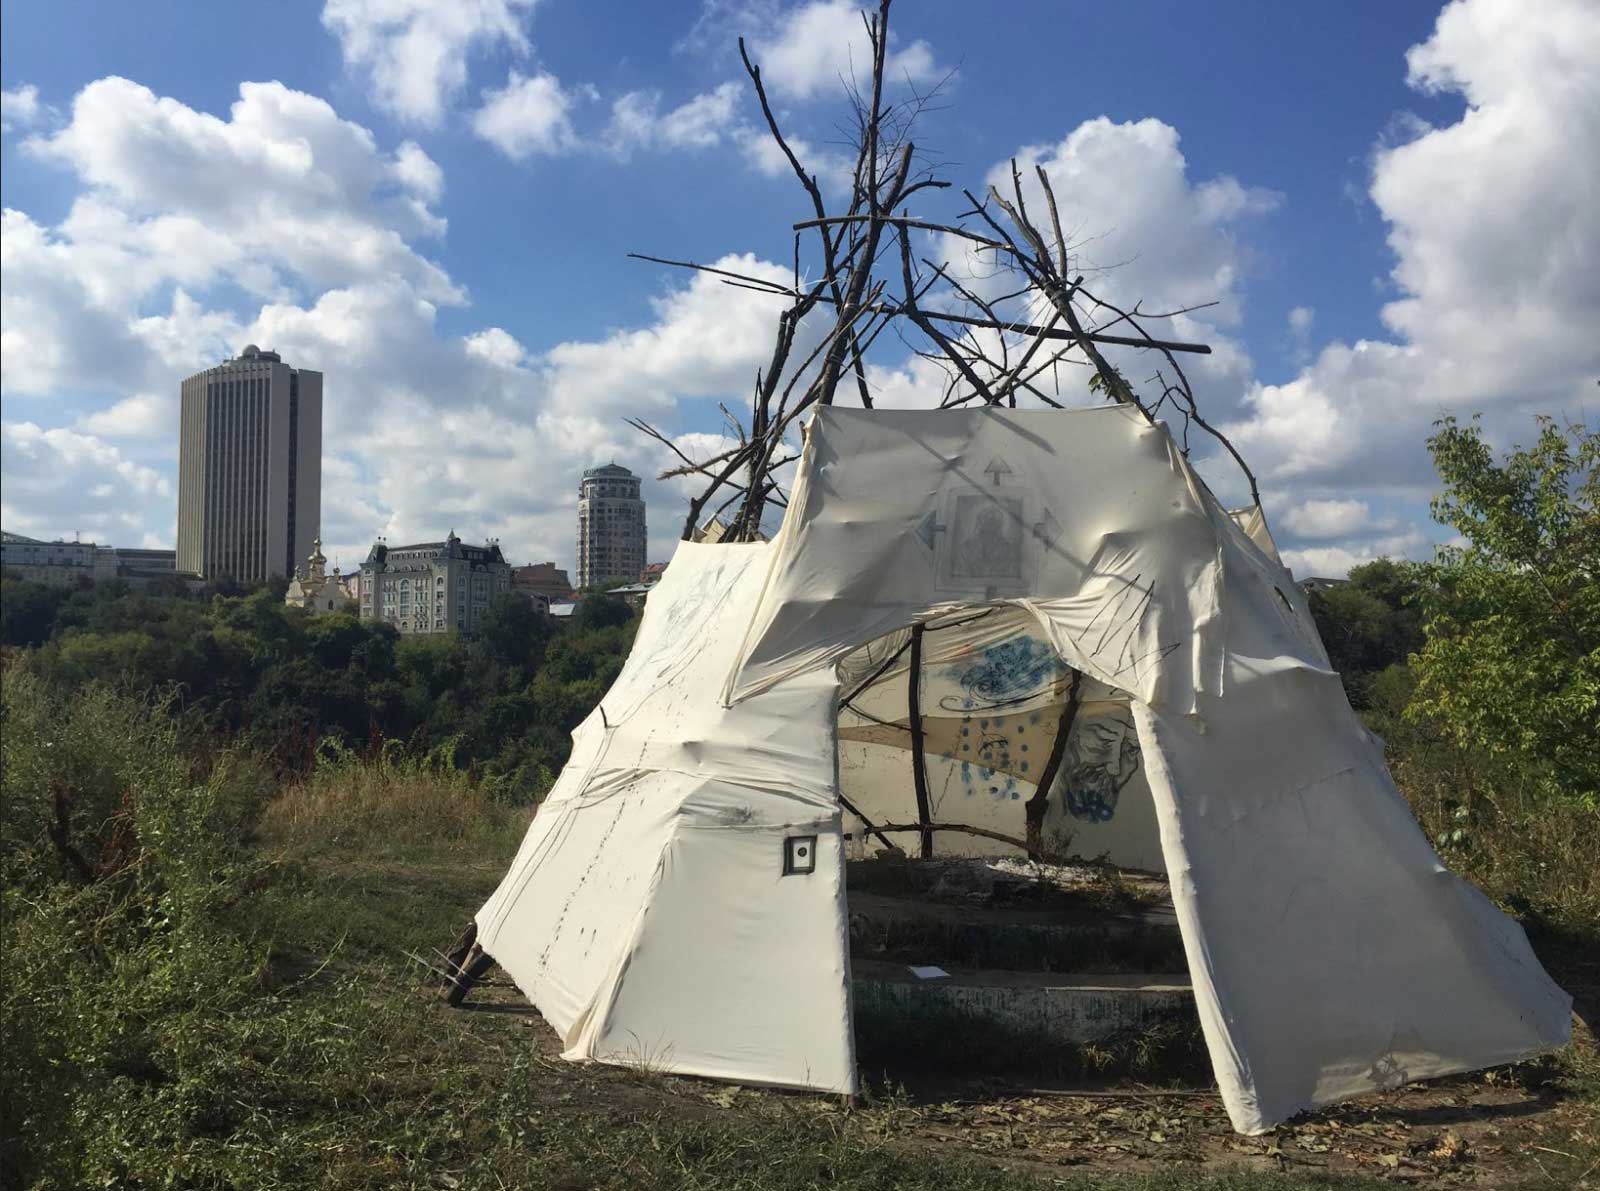 Tent constructed of sticks and fabric with high rise in background